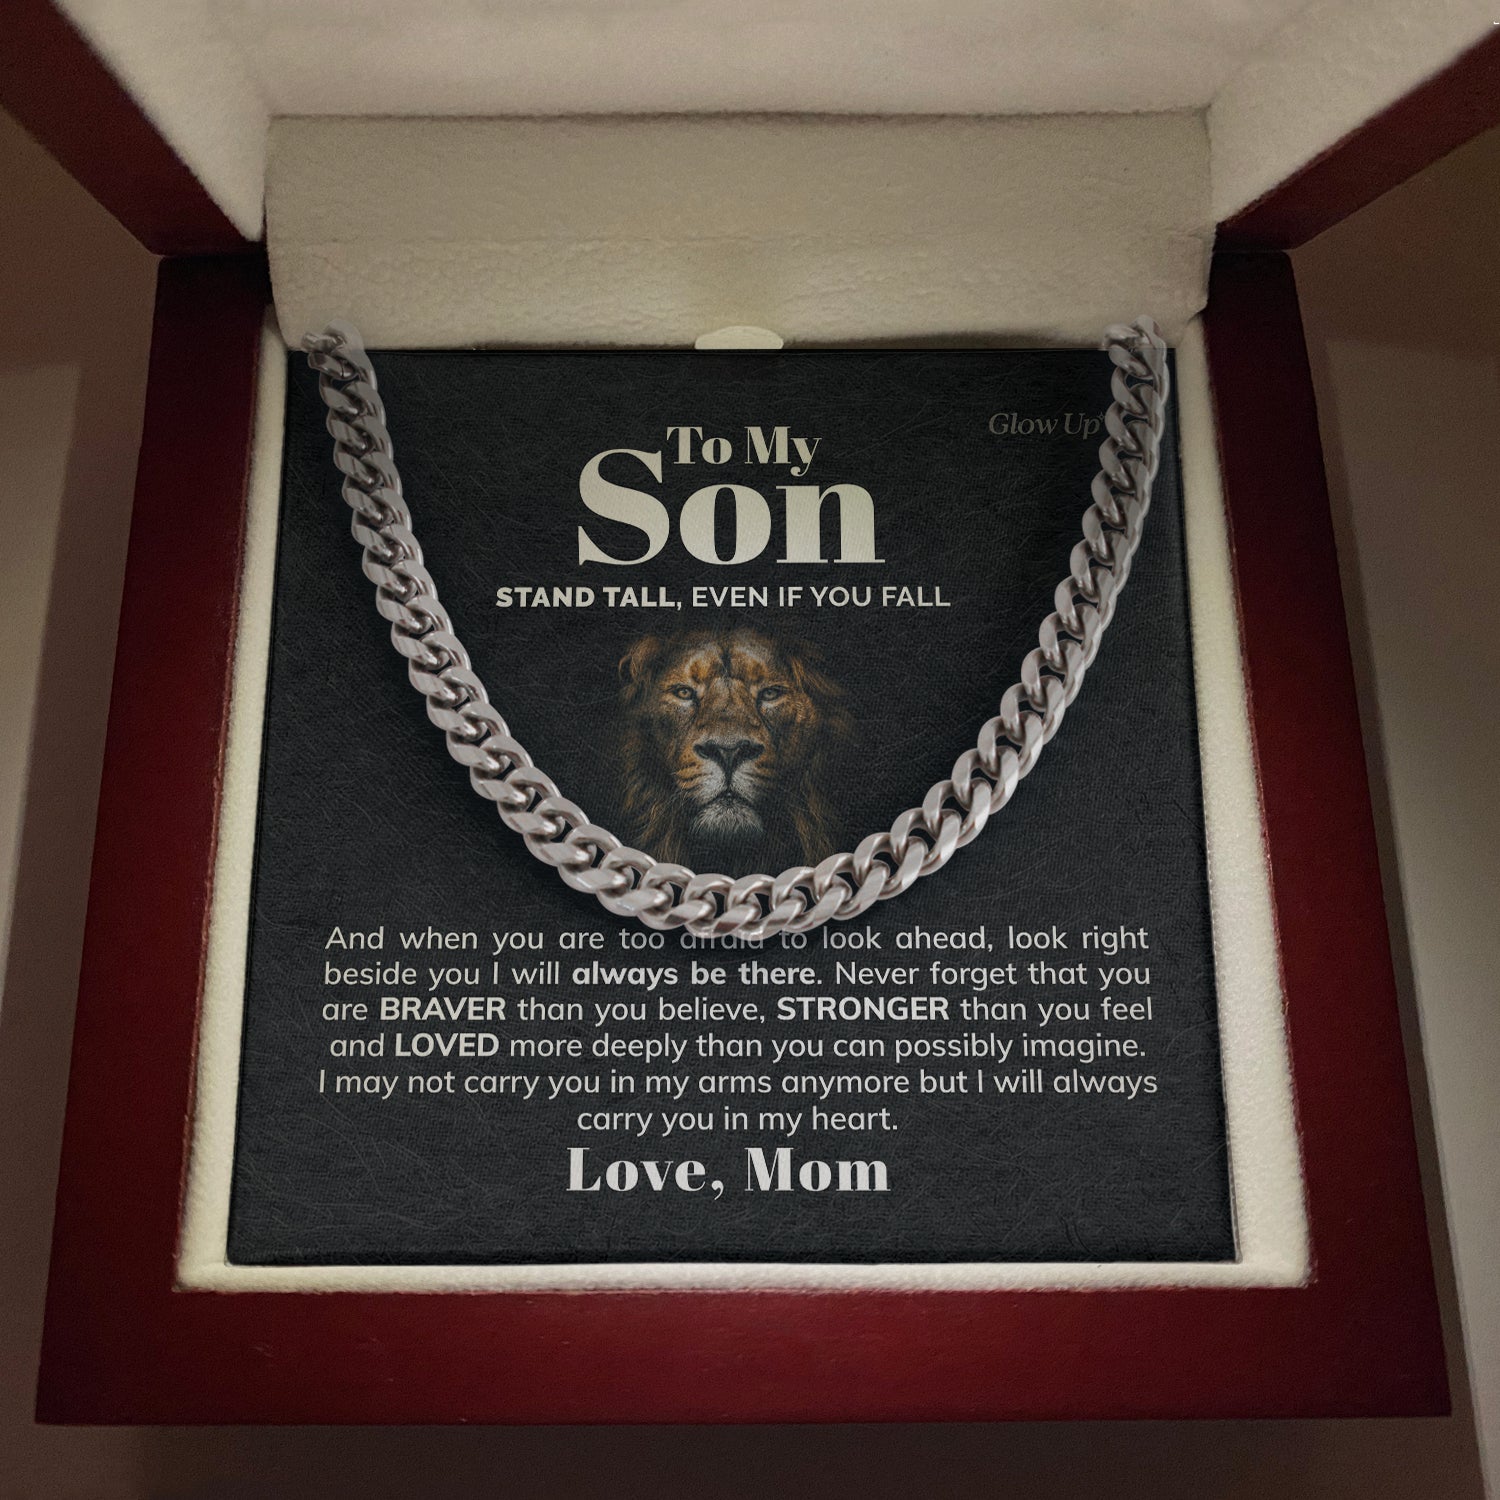 ShineOn Fulfillment Jewelry 316L Stainless Steel / Luxury LED Box To My Son - I carry you in my heart - Cuban Link Chain